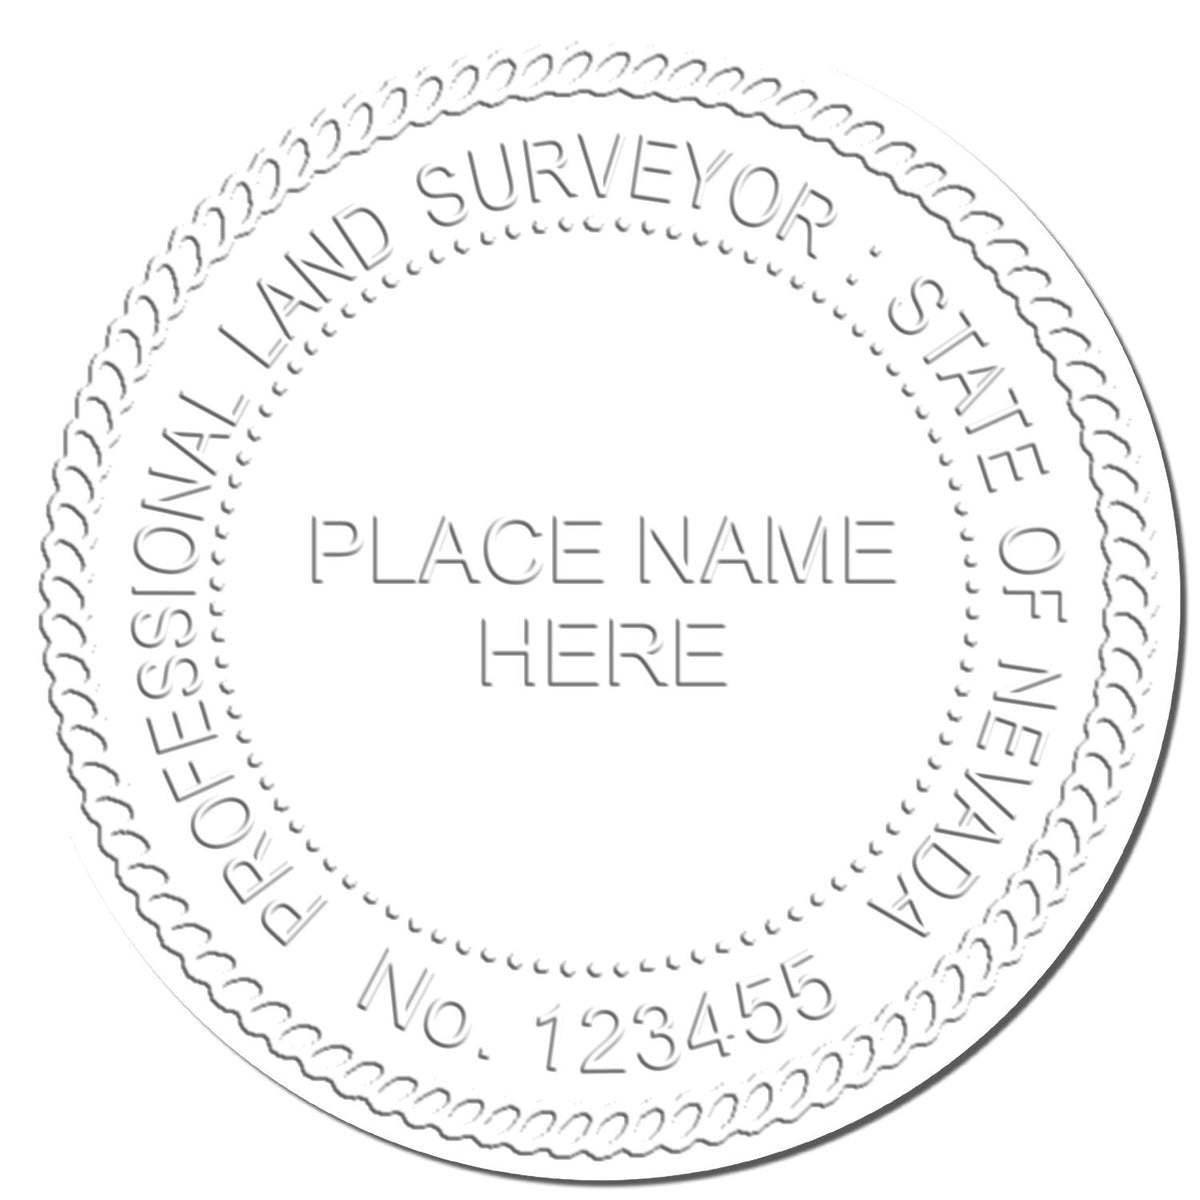 This paper is stamped with a sample imprint of the Long Reach Nevada Land Surveyor Seal, signifying its quality and reliability.